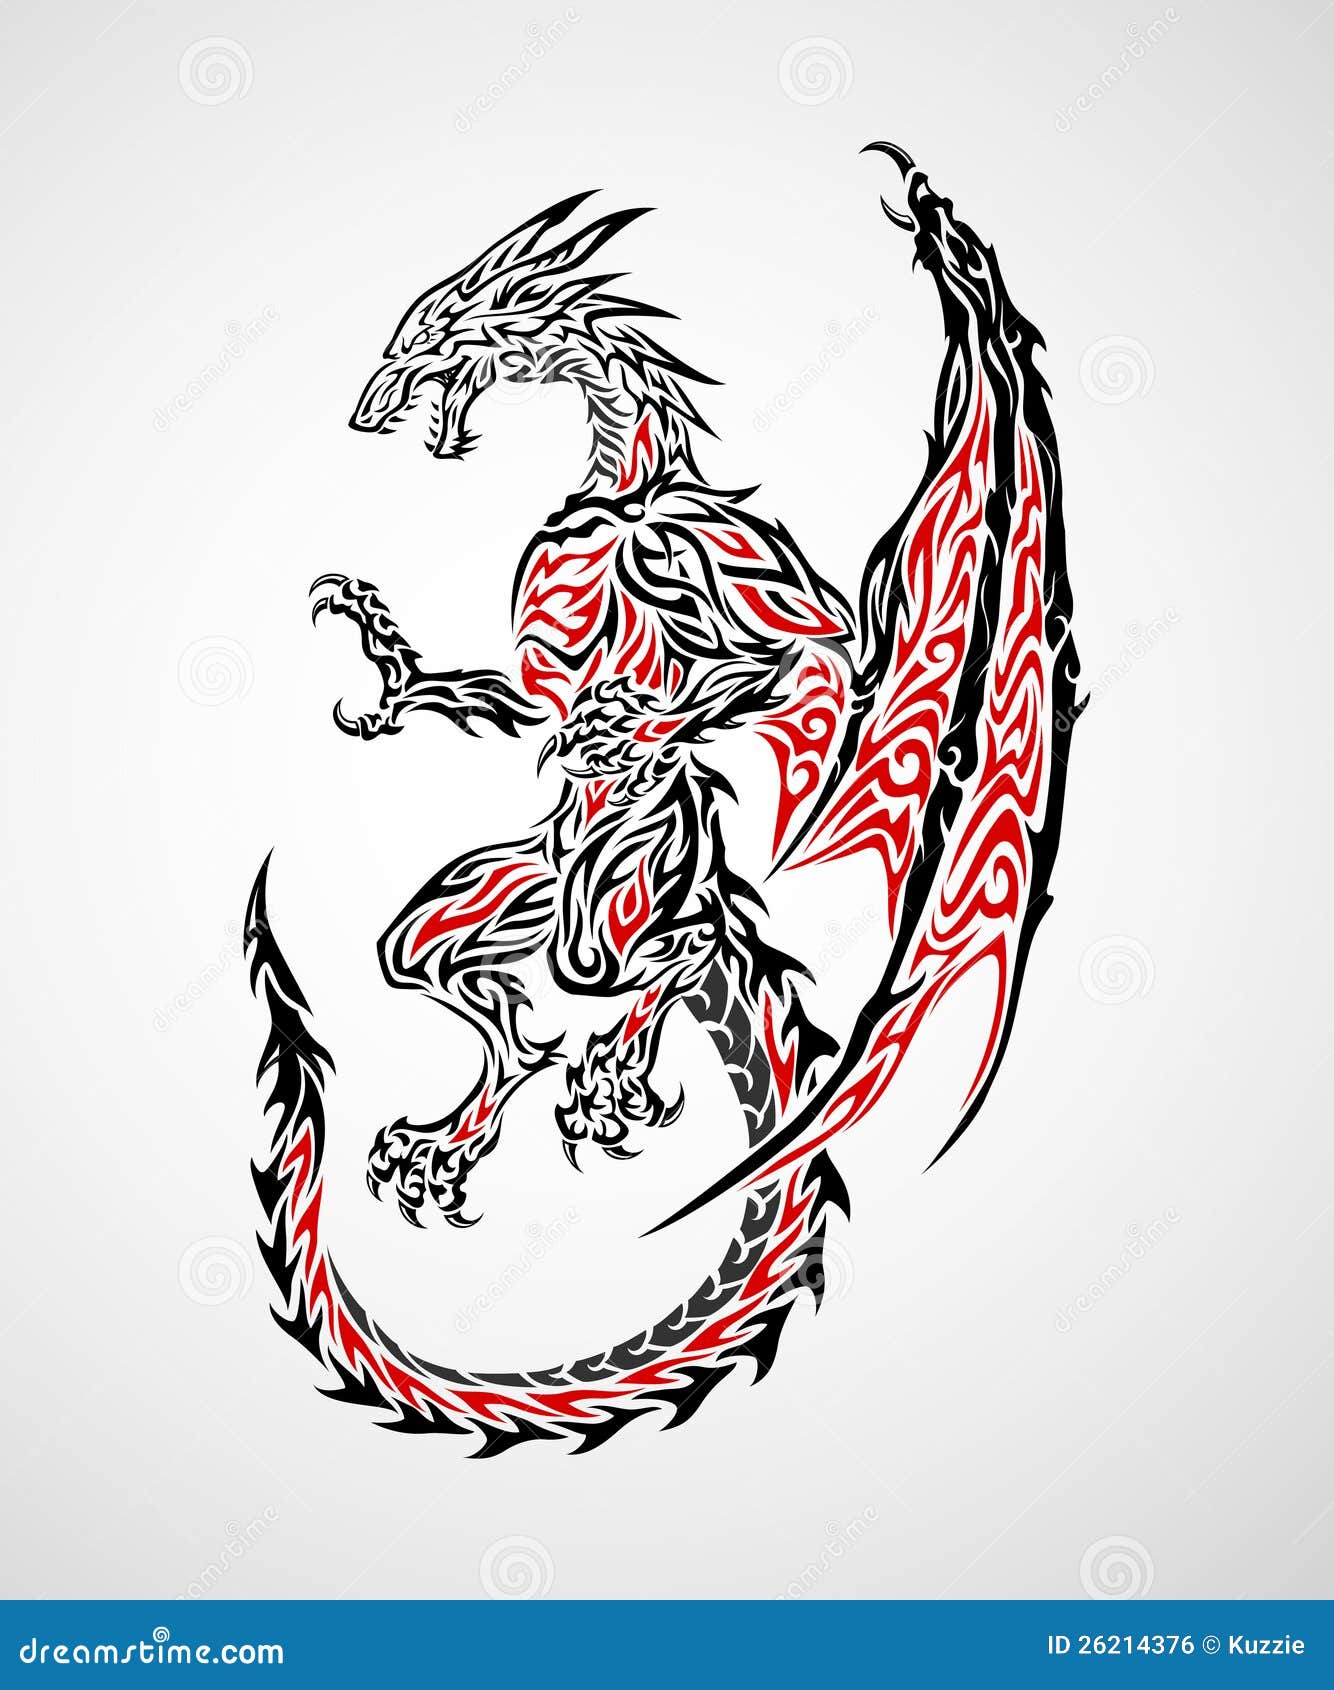 11 Medieval Dragons Tattoo Ideas That Will Blow Your Mind  alexie